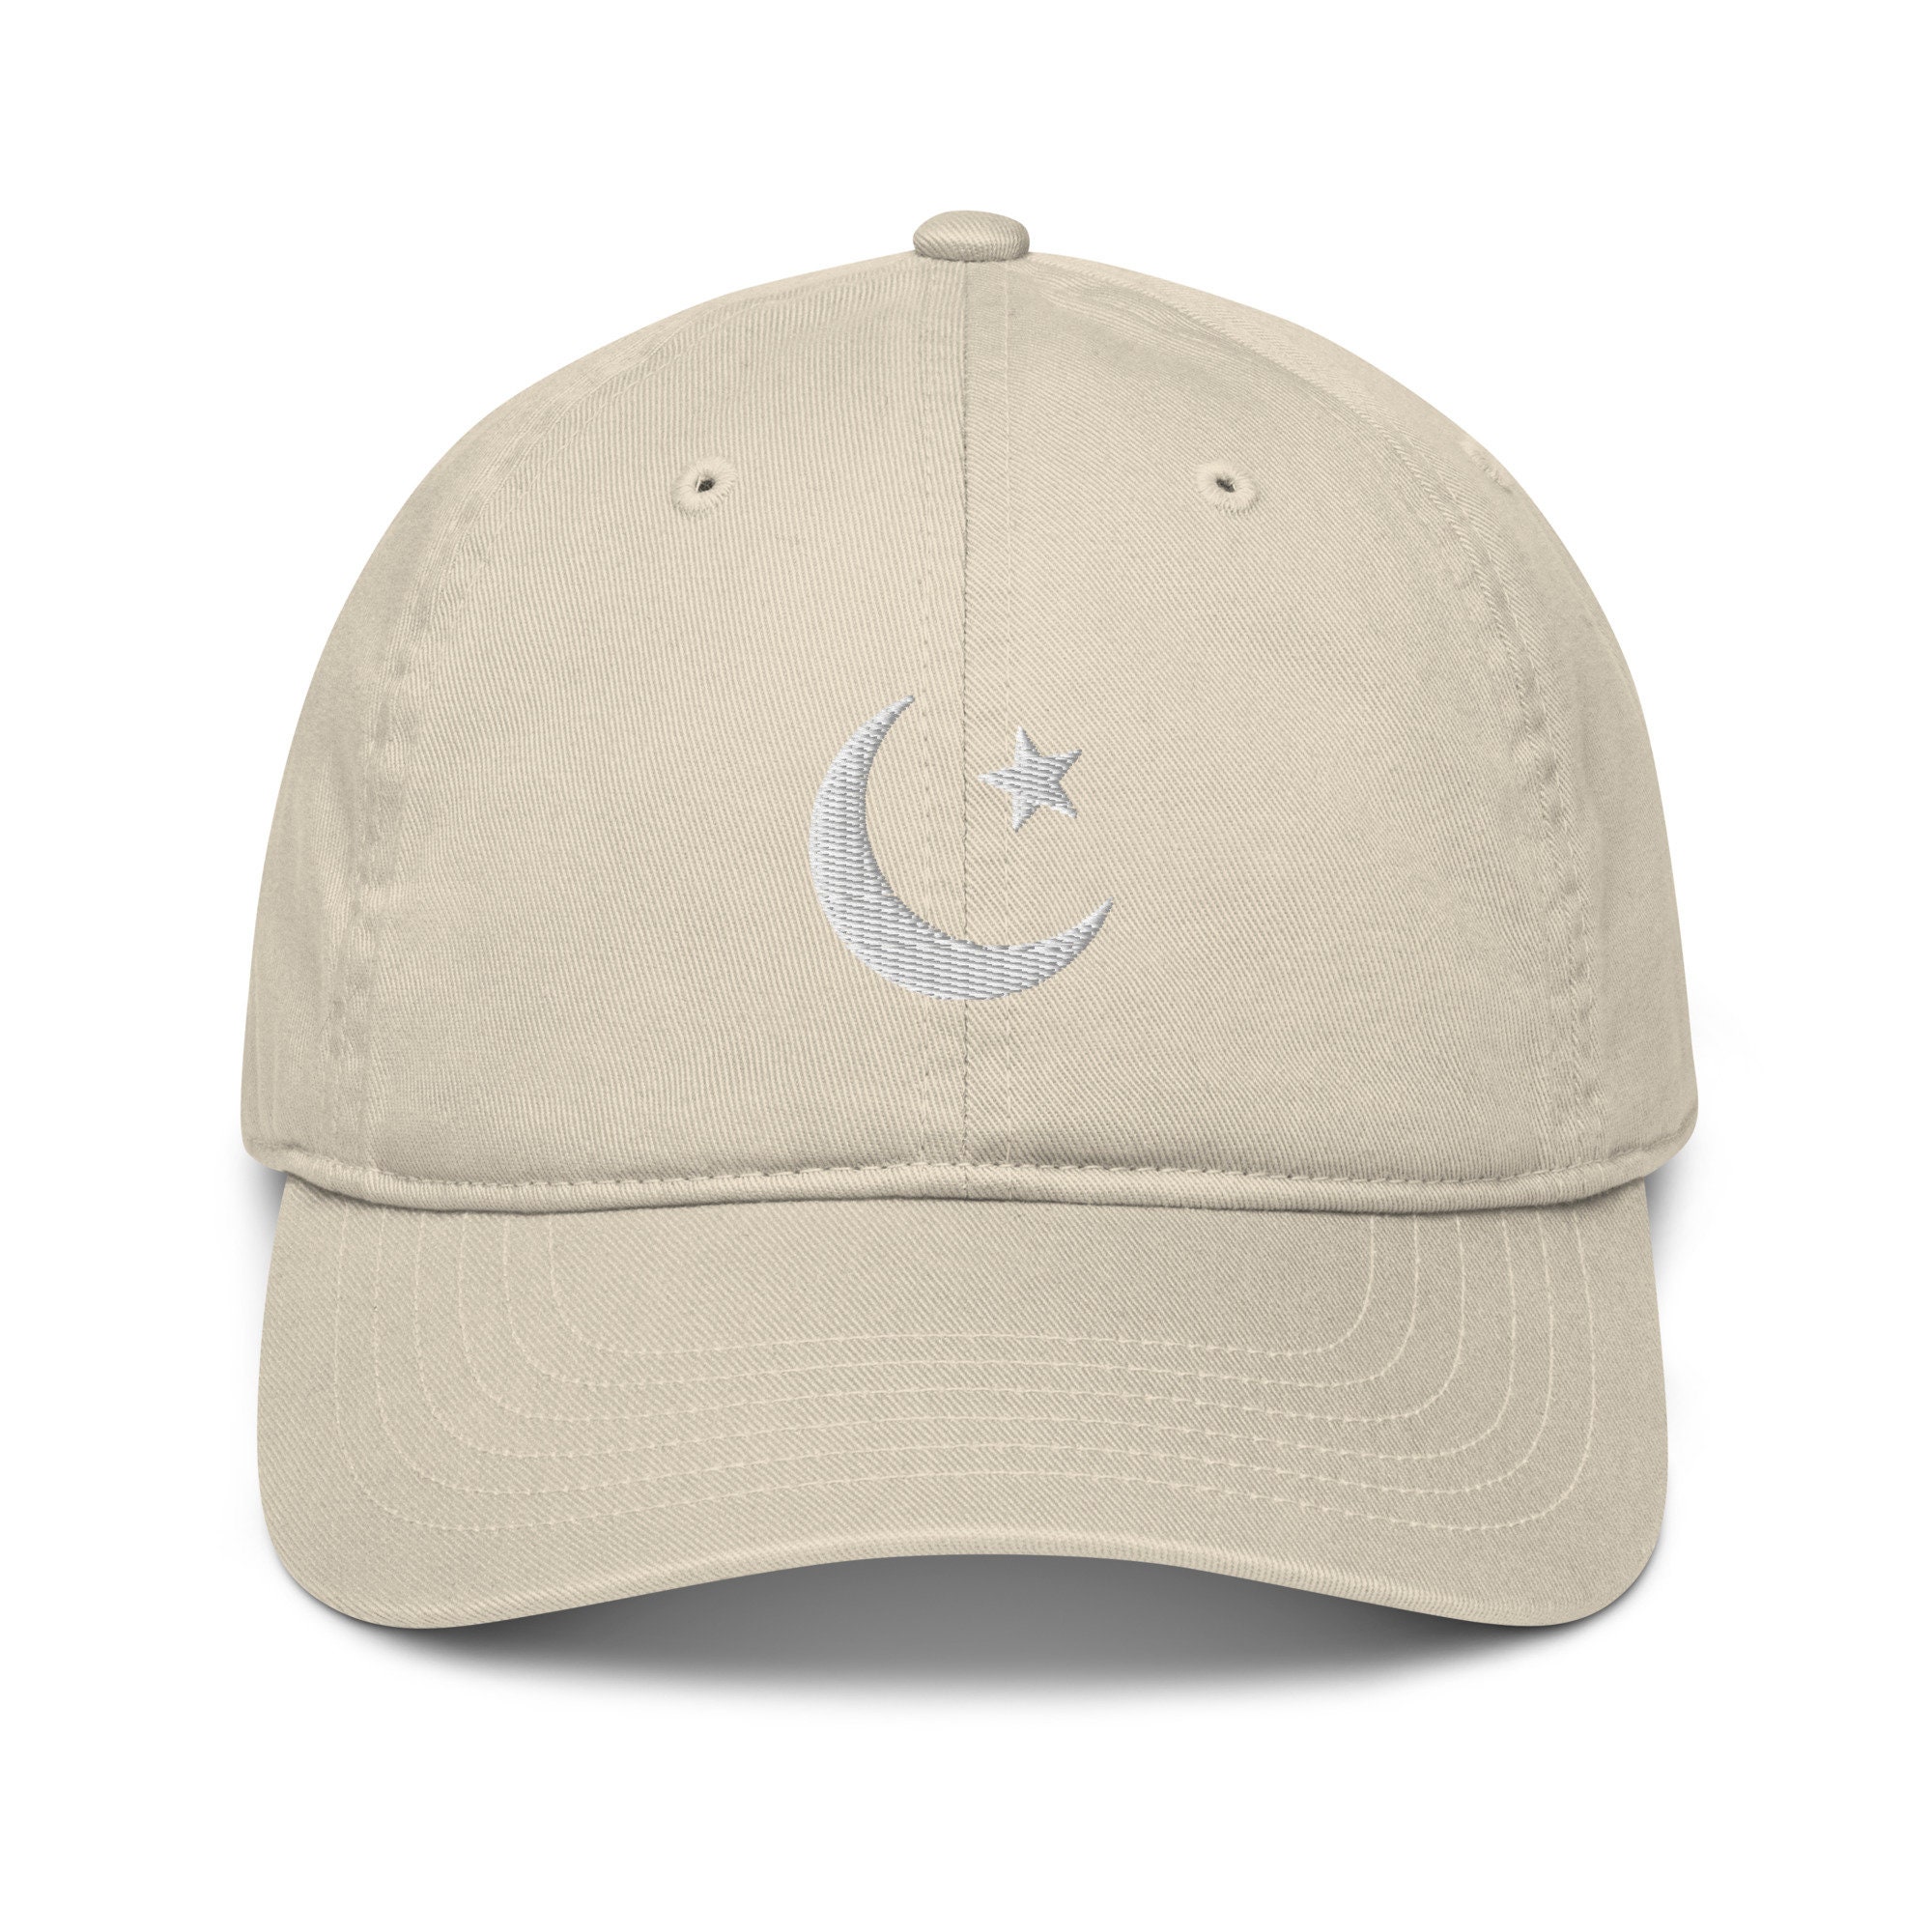 Pakistan Crescent Moon And Star Father's Day Embroidered Hat